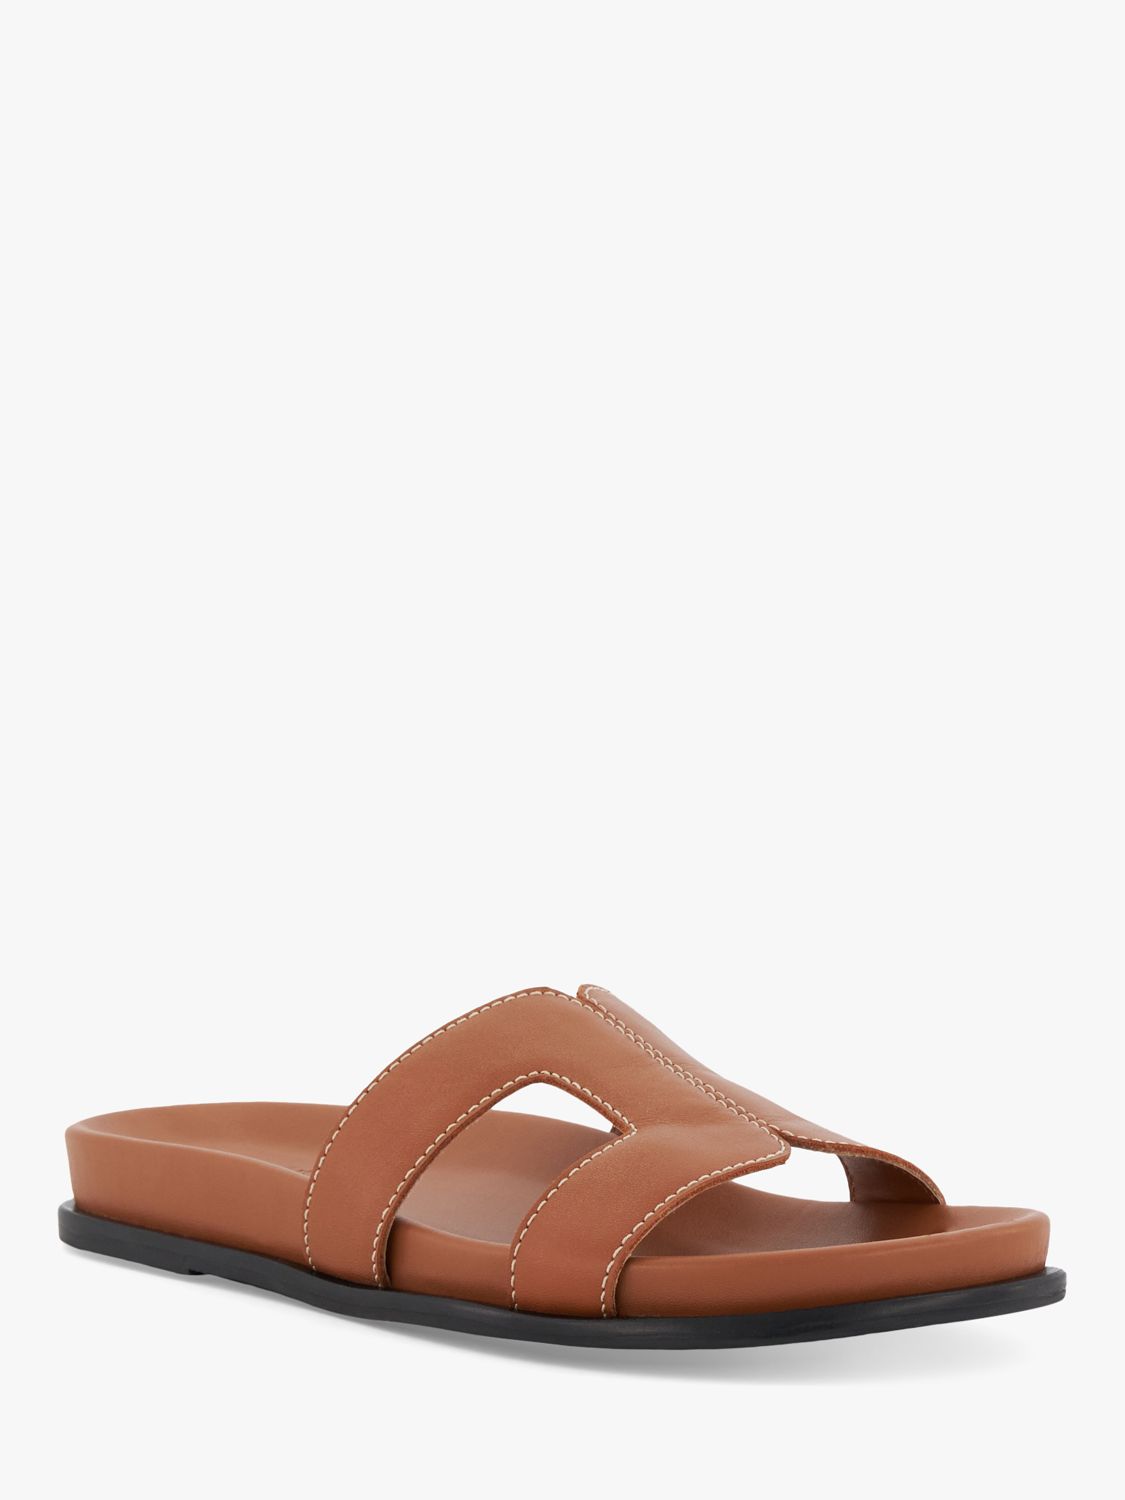 Dune Wide Fit Loupa Leather Sandals, Tan, 3